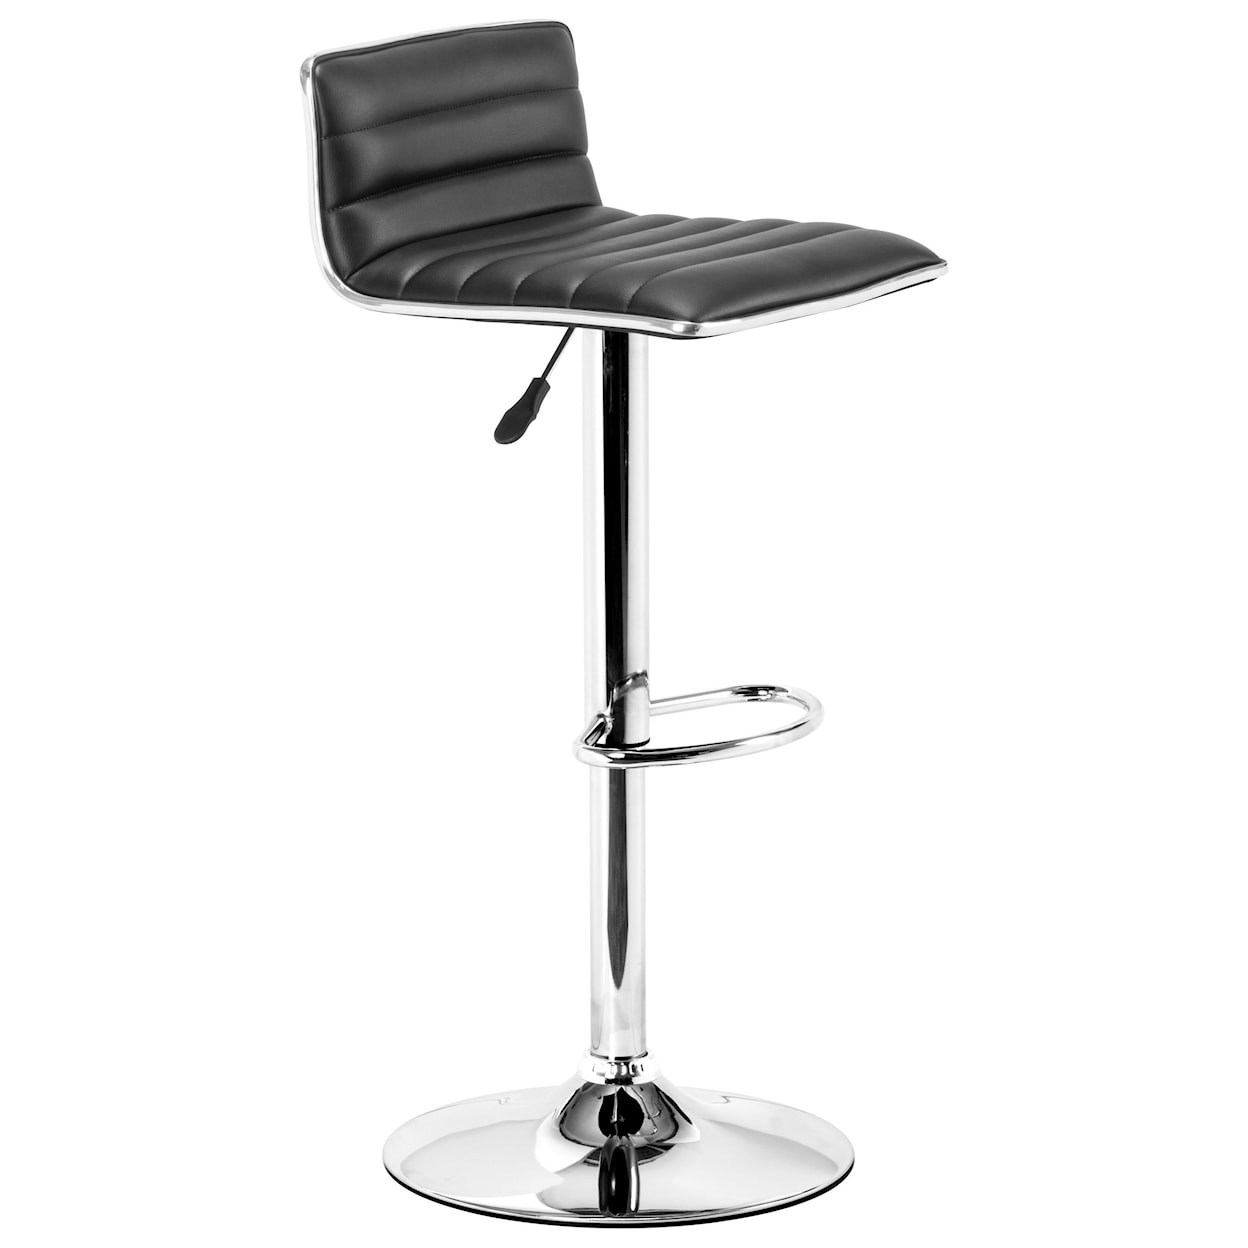 Zuo Equation Bar Chair